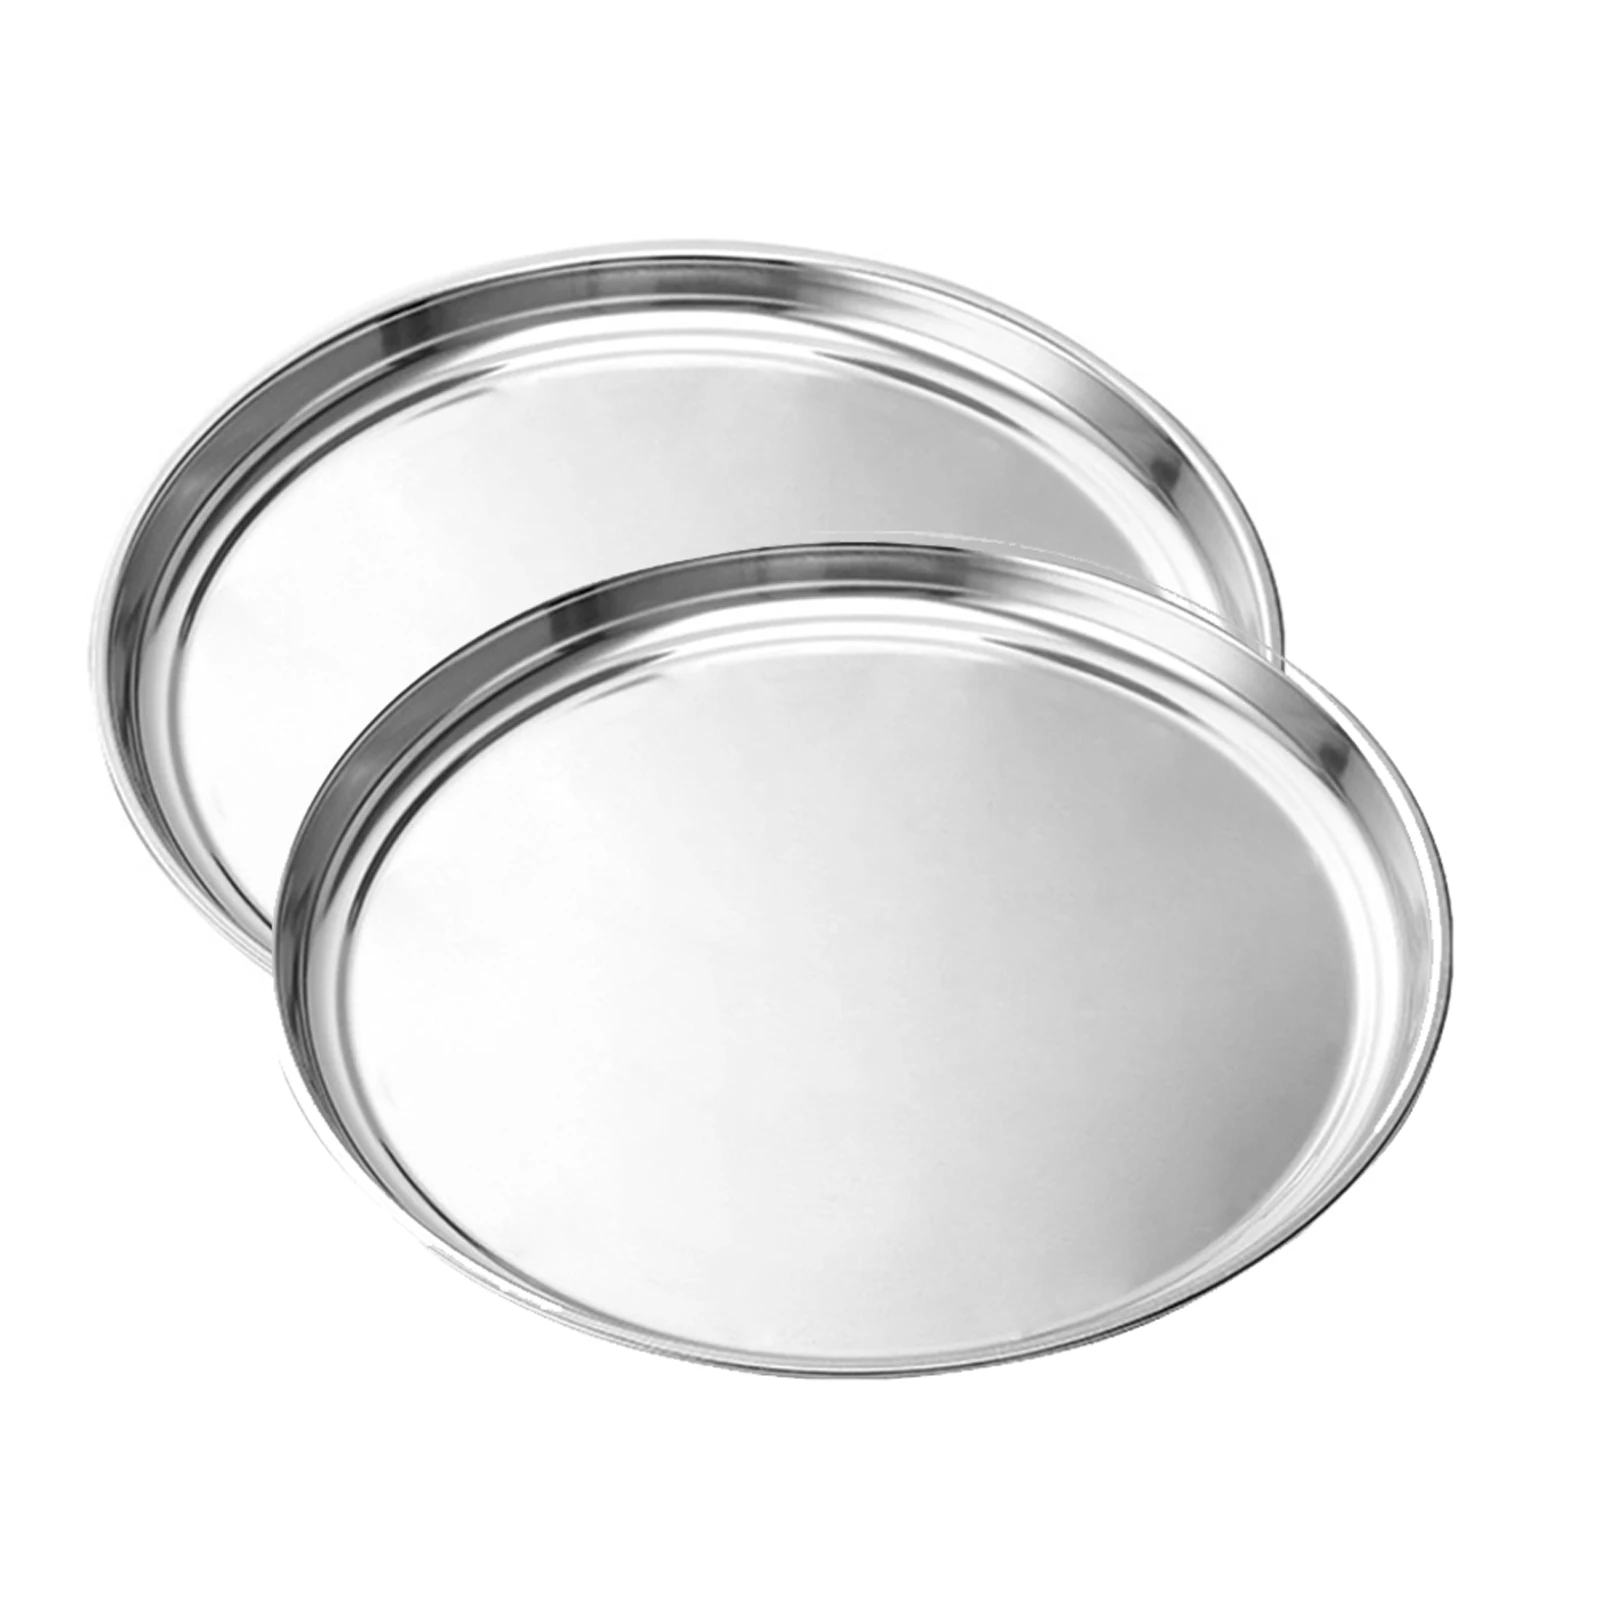 

2pcs/pack Sheet Round Home Baking Tray Roasting Thickened Stainless Steel Serving Tool Bakeware Kitchen Oven Pizza Pan